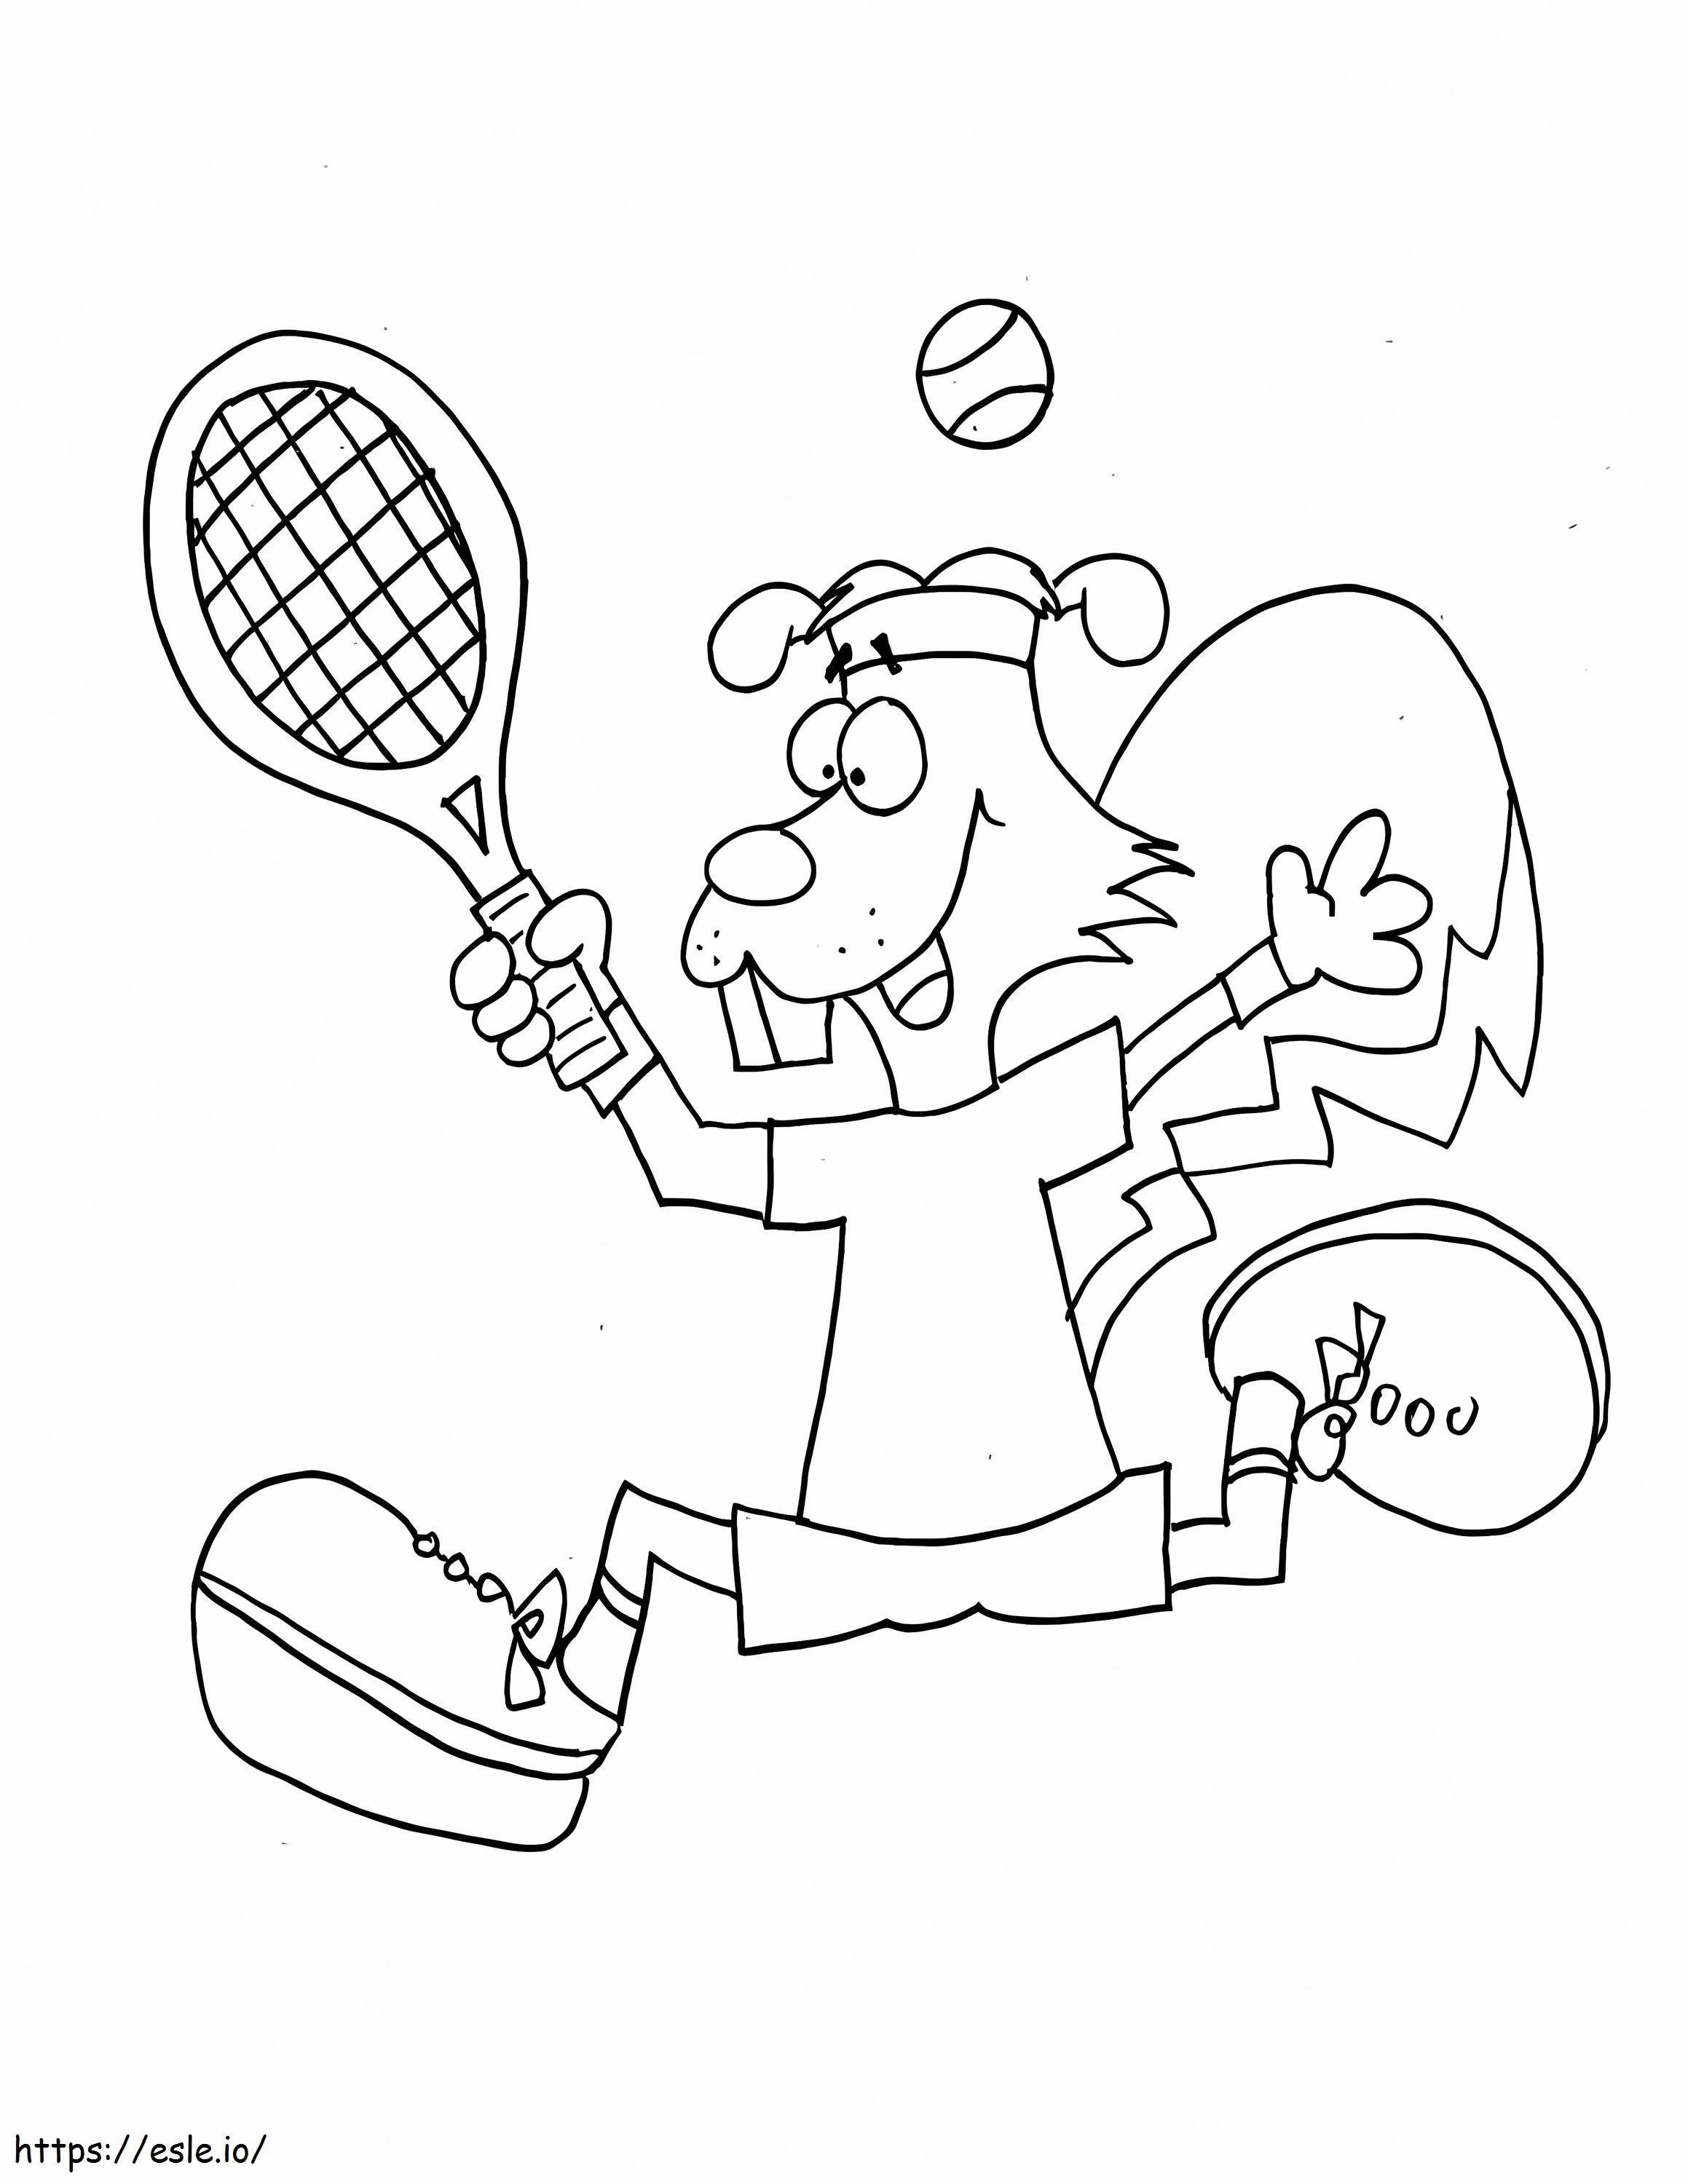 Squirrel Playing Tennis coloring page